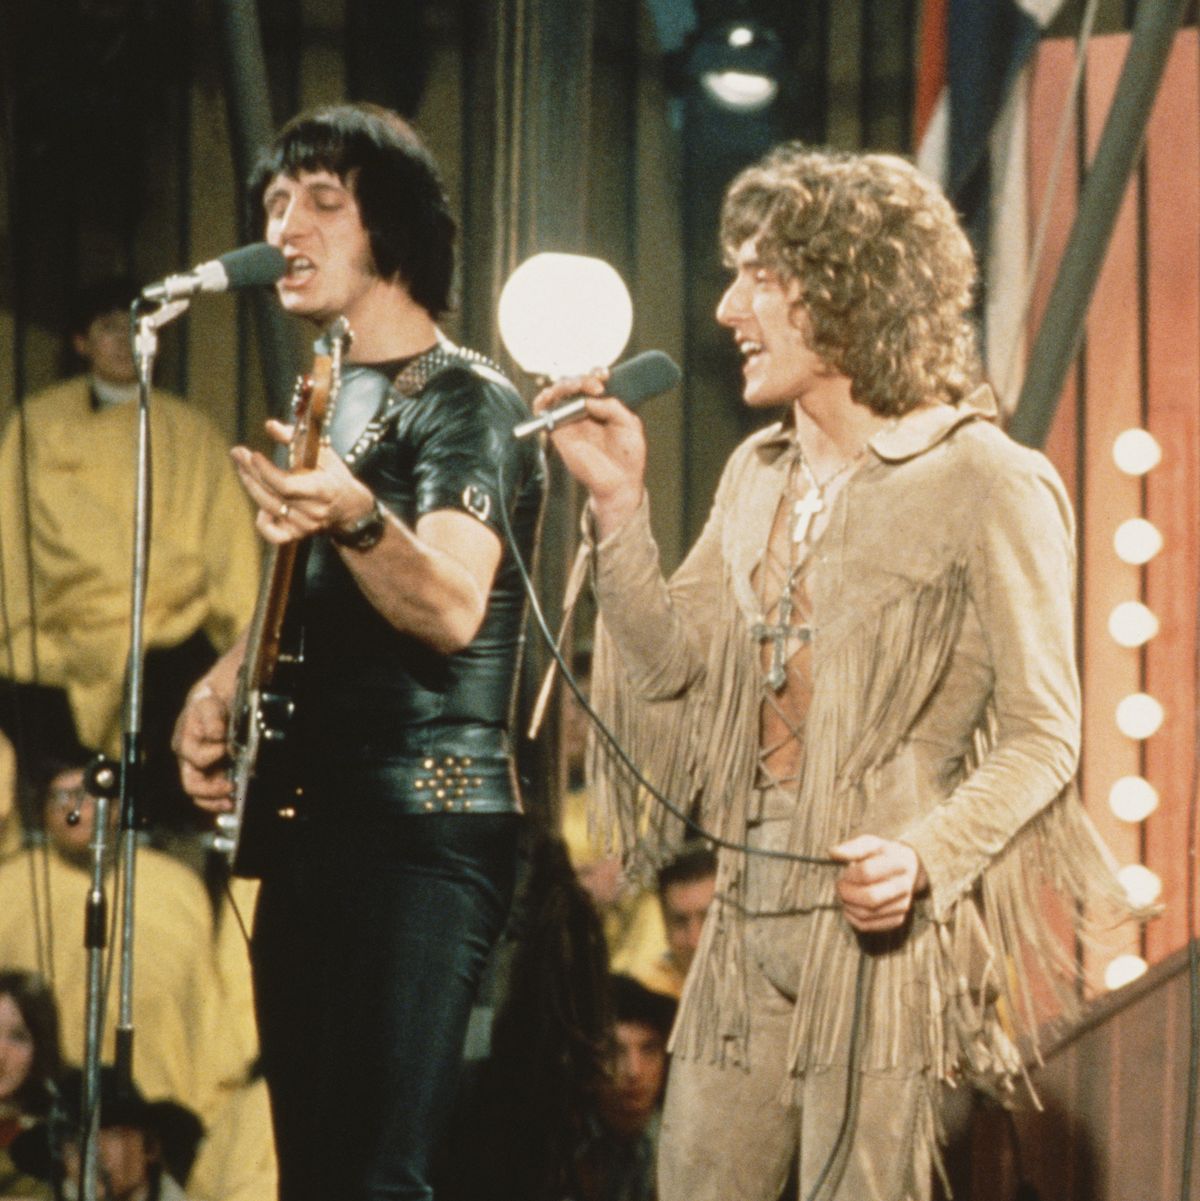 Interview: The Who 'Rock and Roll Circus' Performance